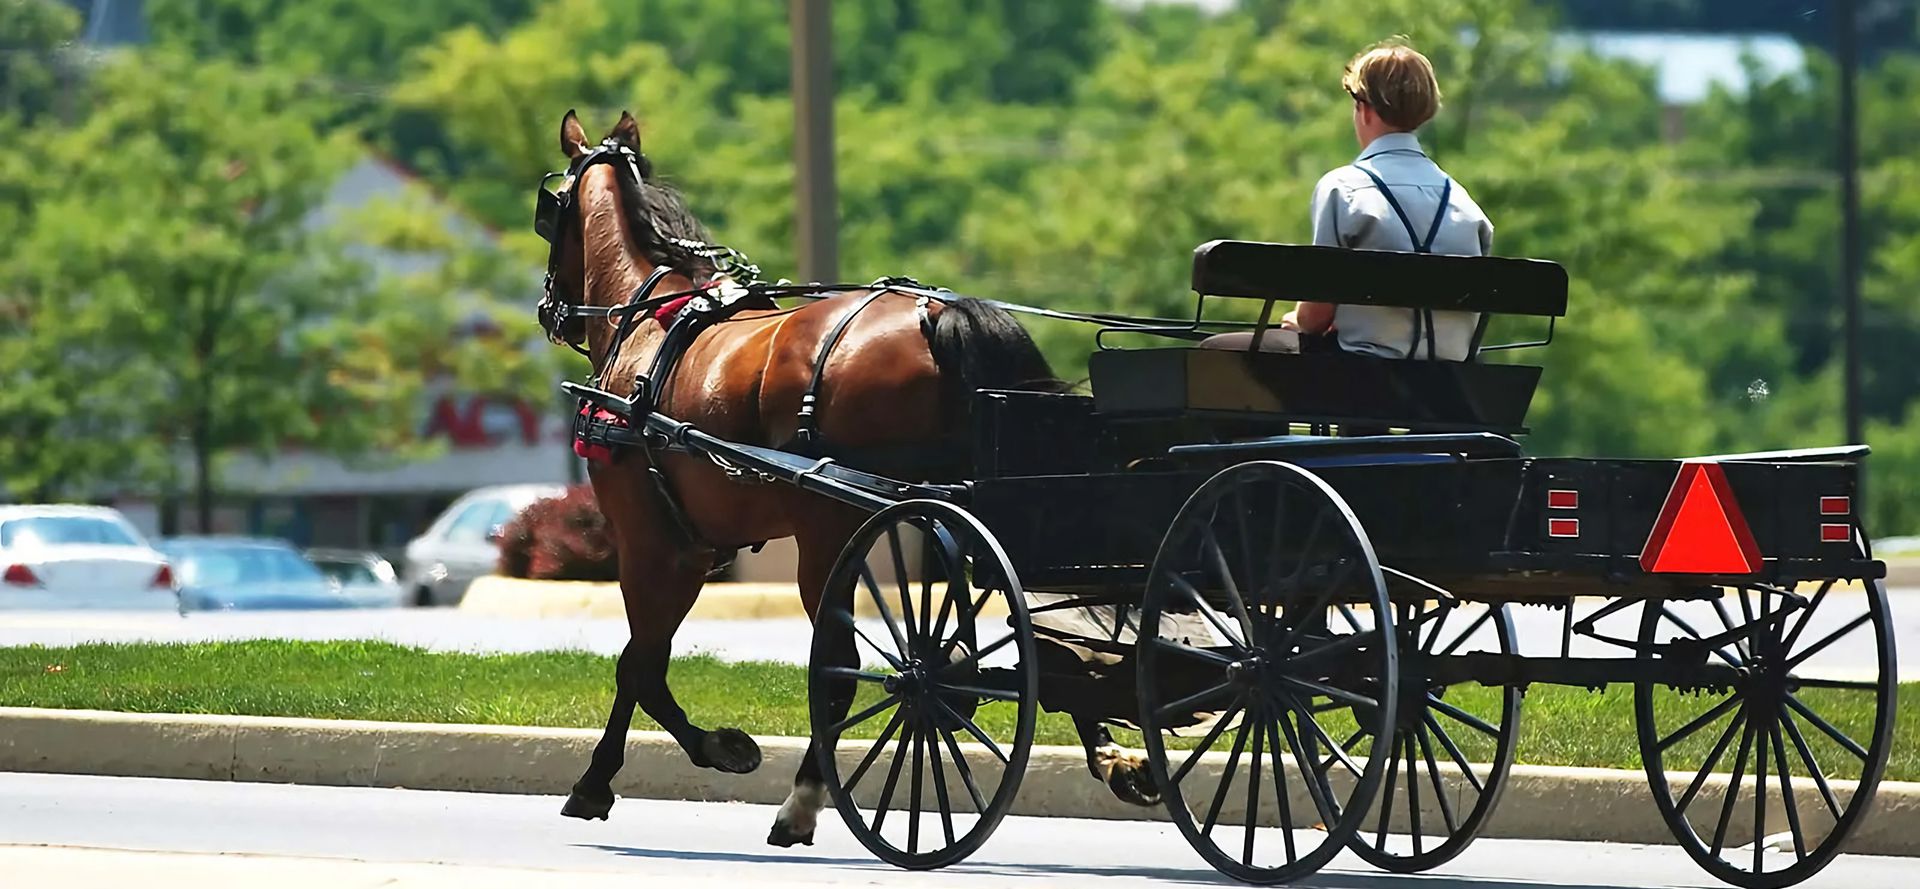 Amish single man in a carriage.